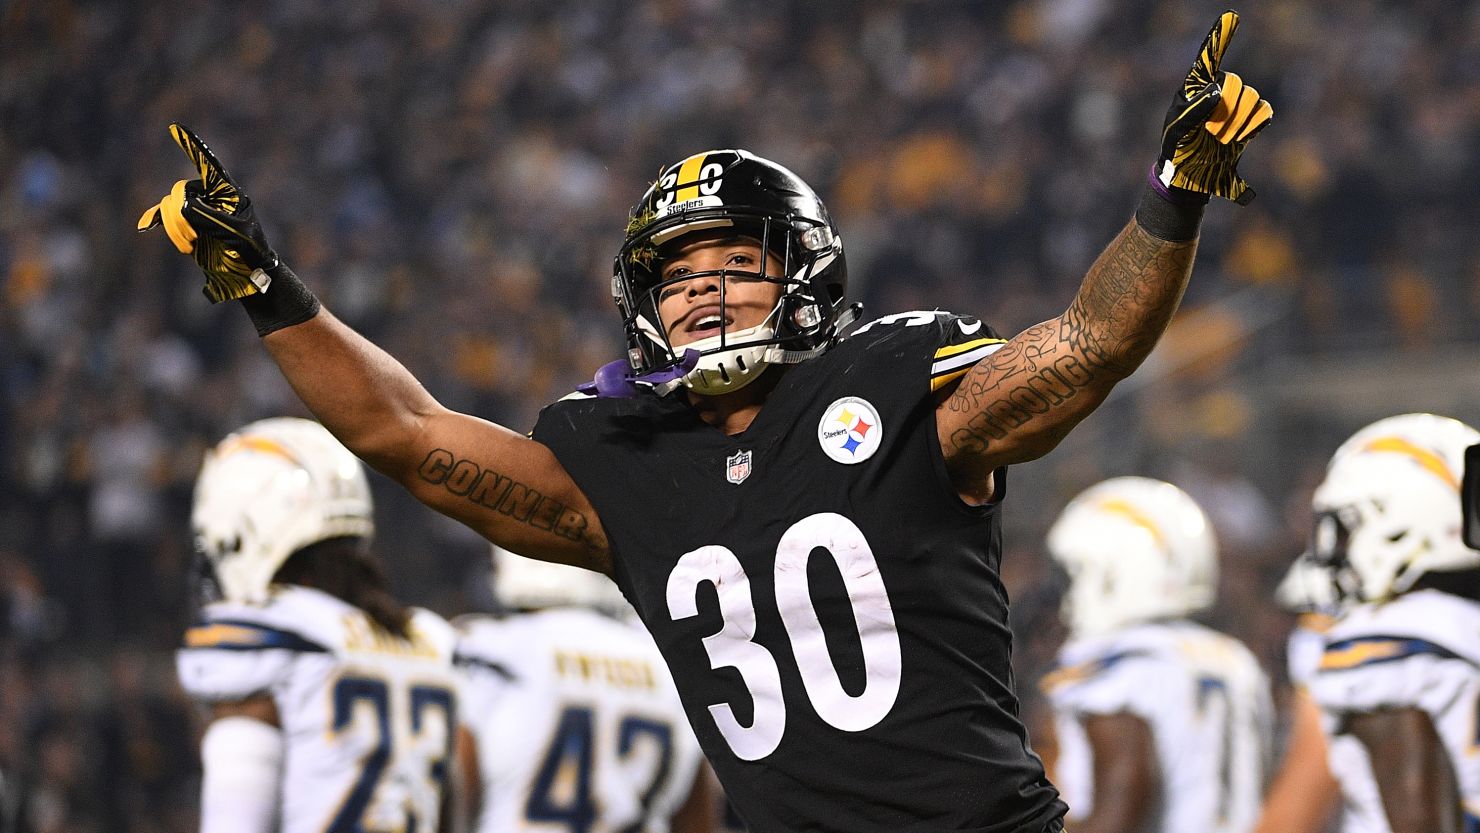 James Conner celebrates after scoring against the Los Angeles Chargers on December 2, 2018, in Pittsburgh.